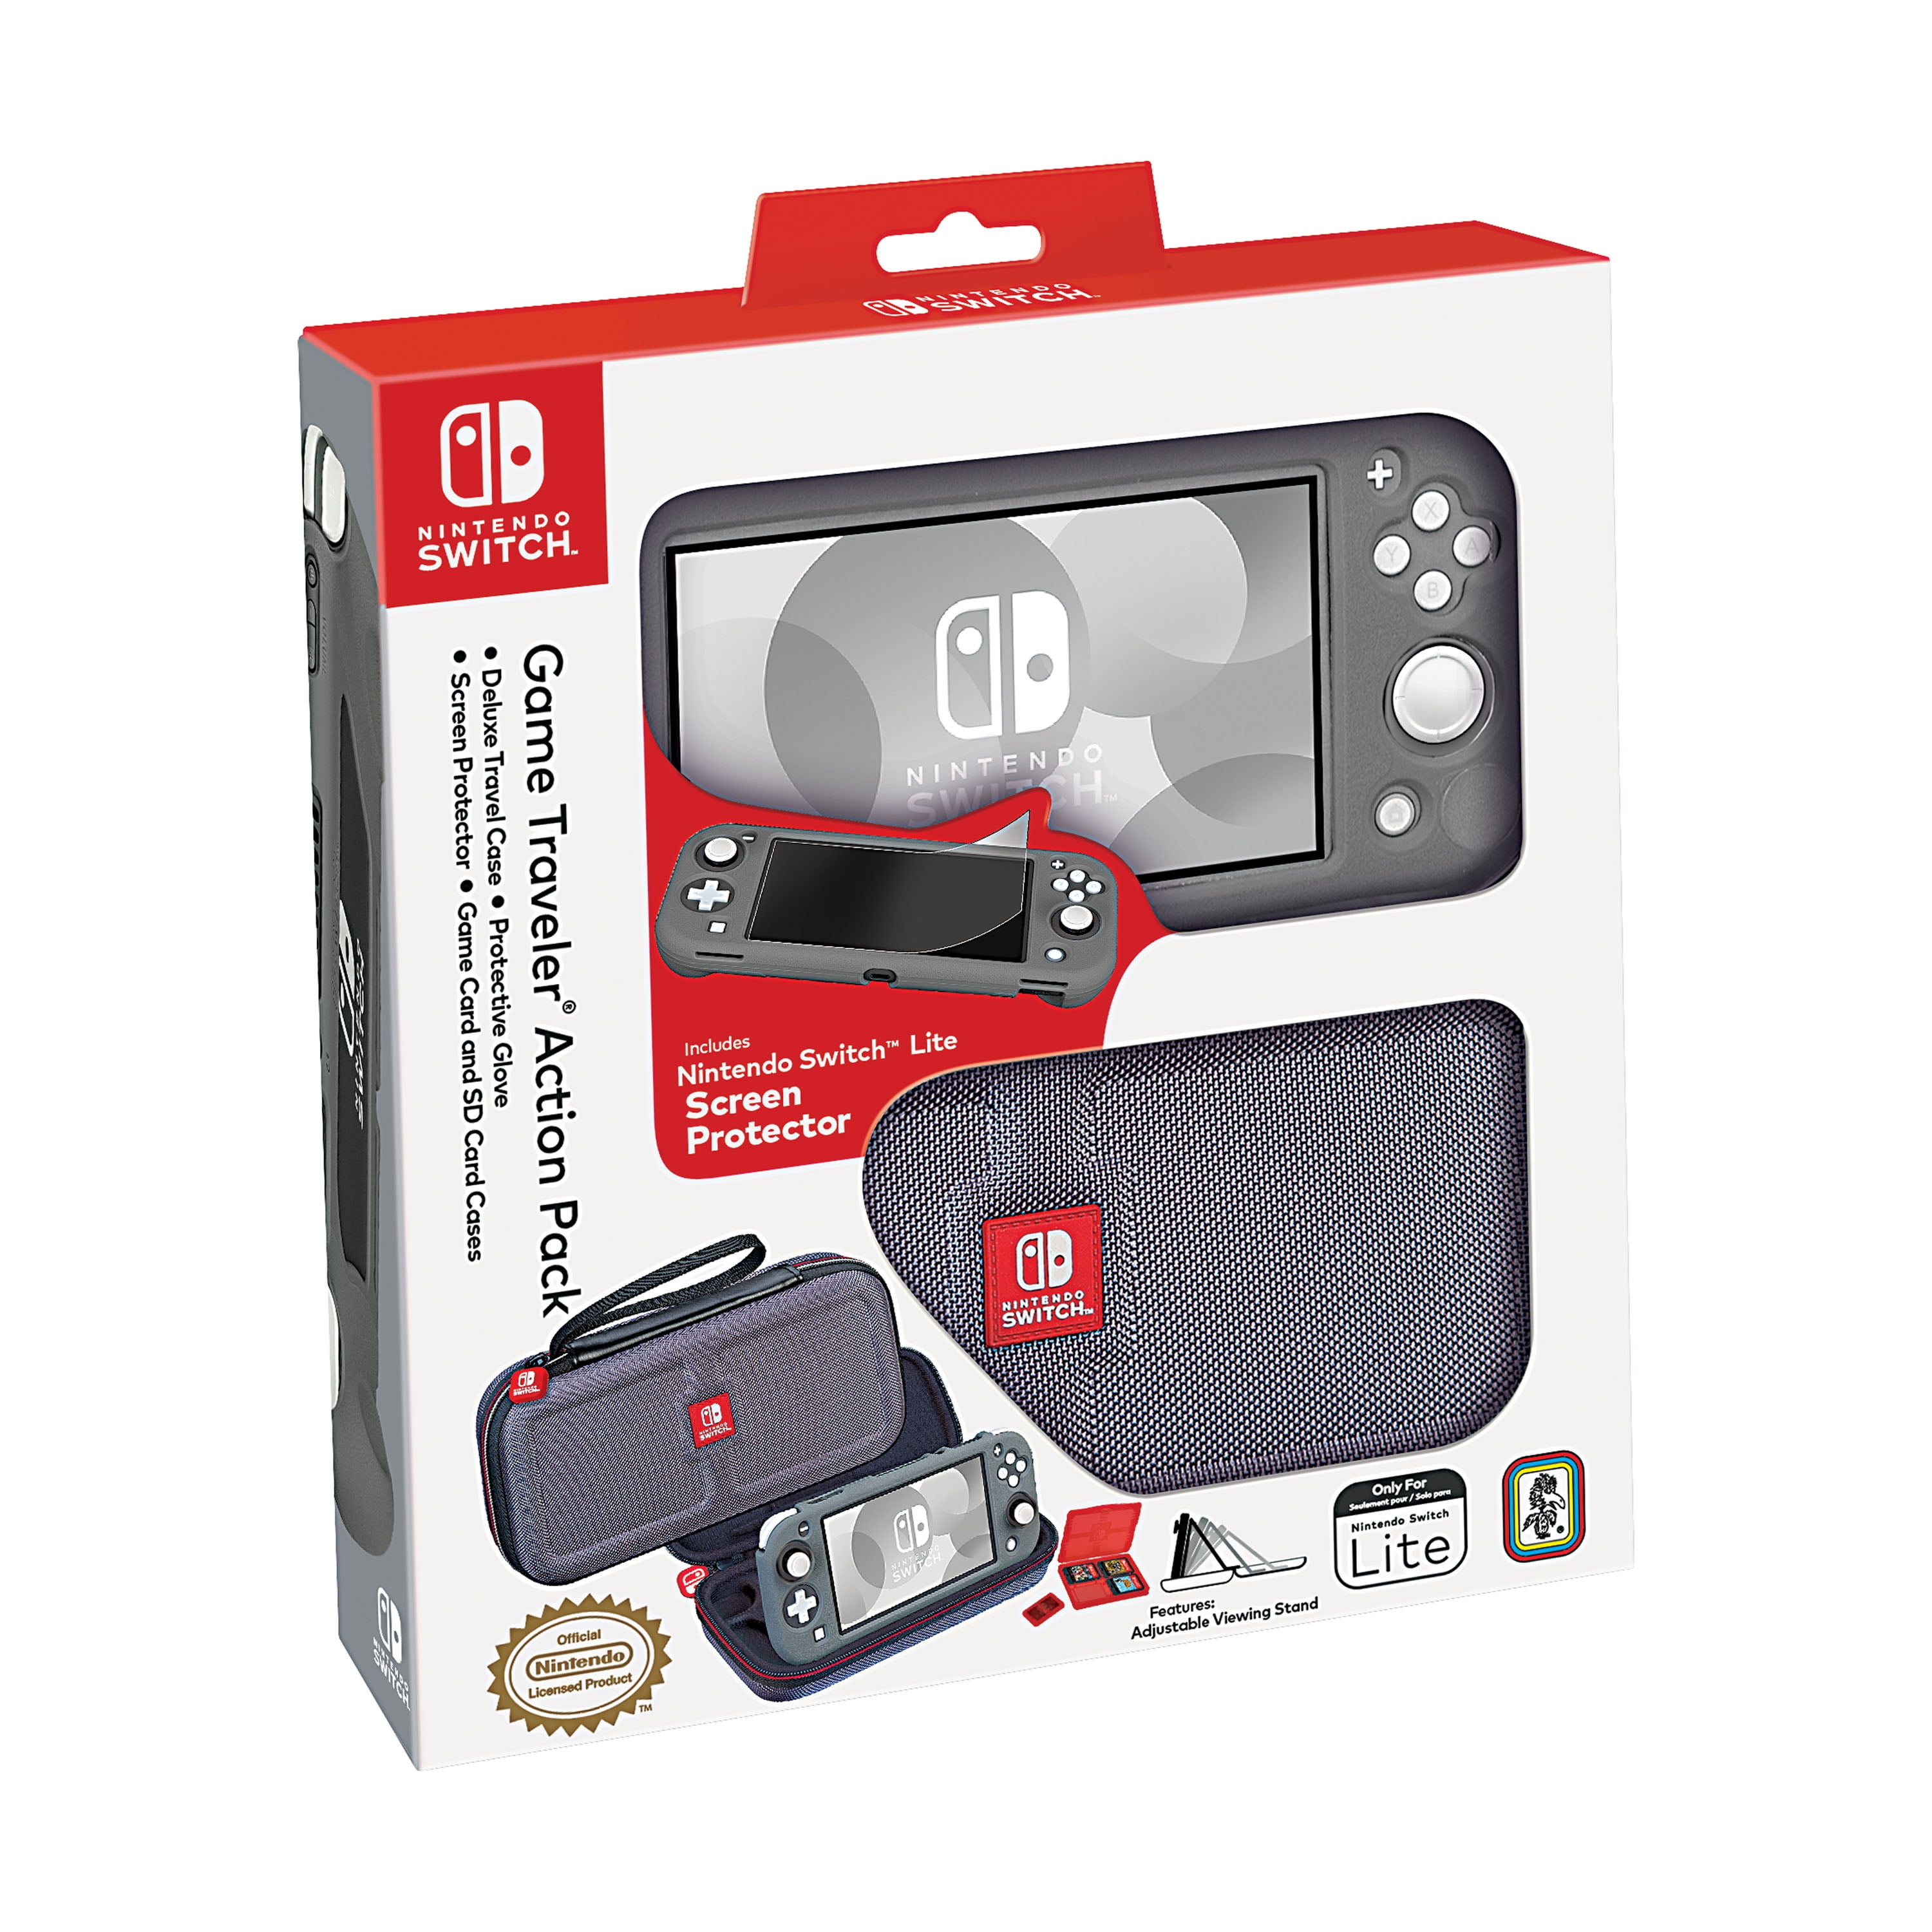 RDS Industries - Nintendo Switch Lite, Video Traveler Deluxe, Video Gaming Action Pack - Walmart.com